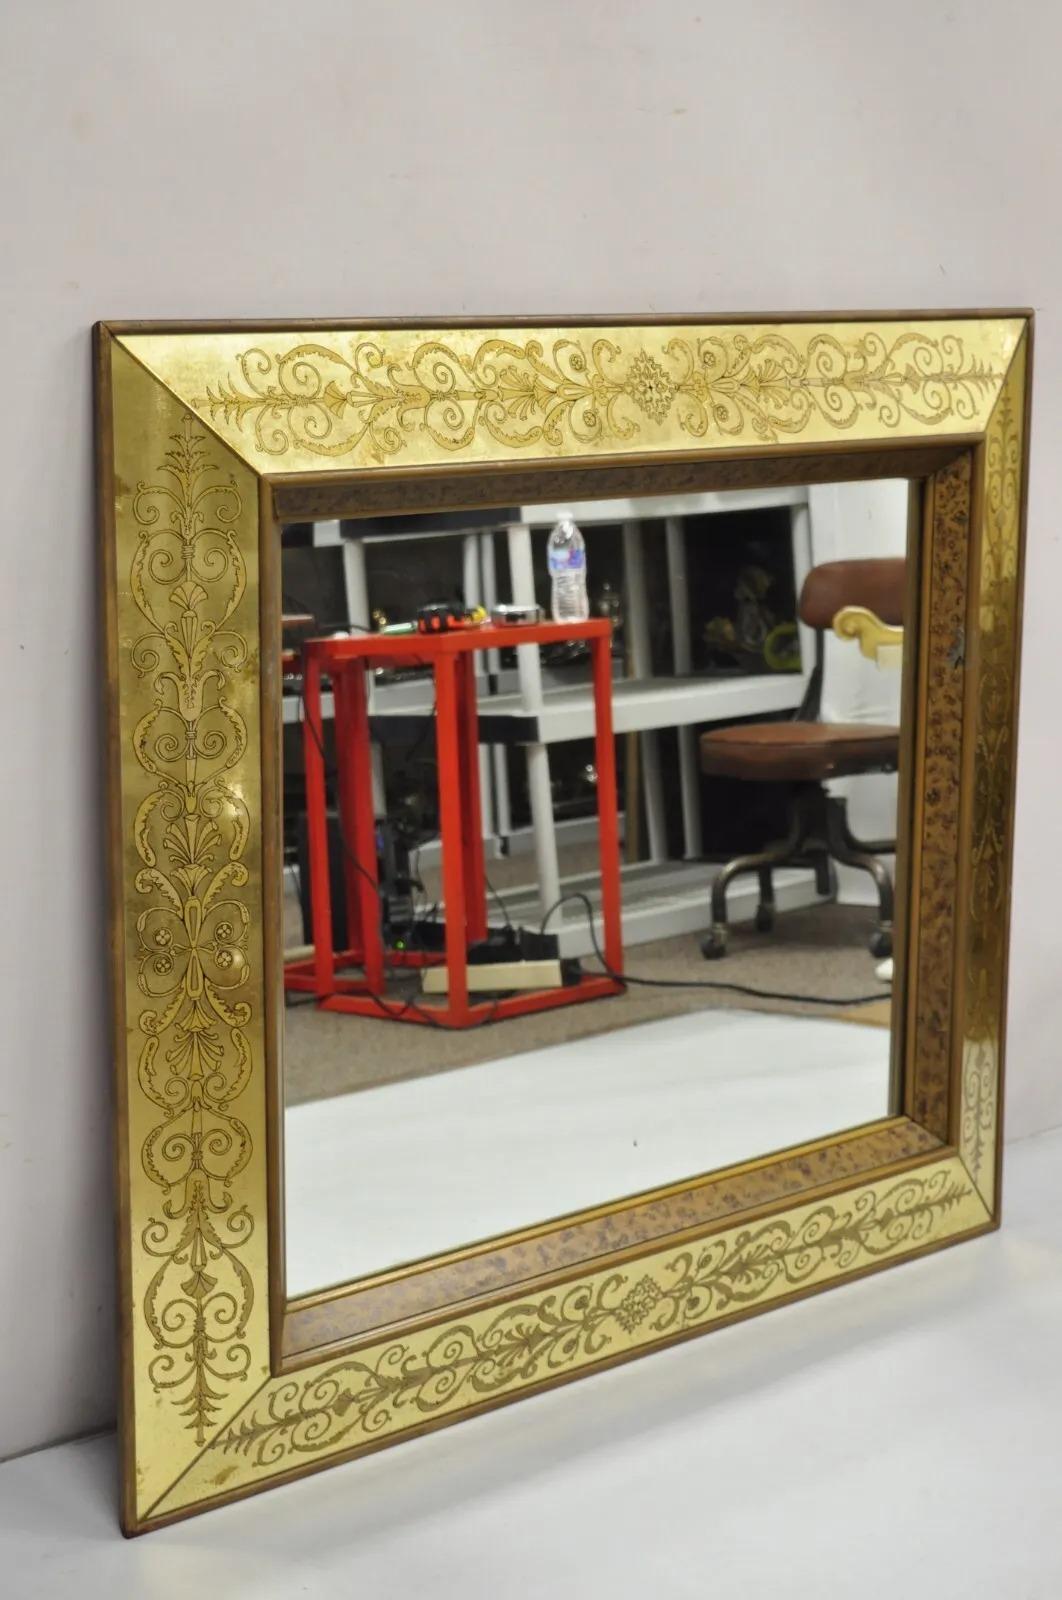 Vintage Hollywood Regency Gilt Gold Leaf Italian Style Rectangular Wall Mirror. Item features glass mirror panel frame, reverse painted scrolling accents with old world distressed finish, very nice vintage wall mirror. Original hardware to rear to